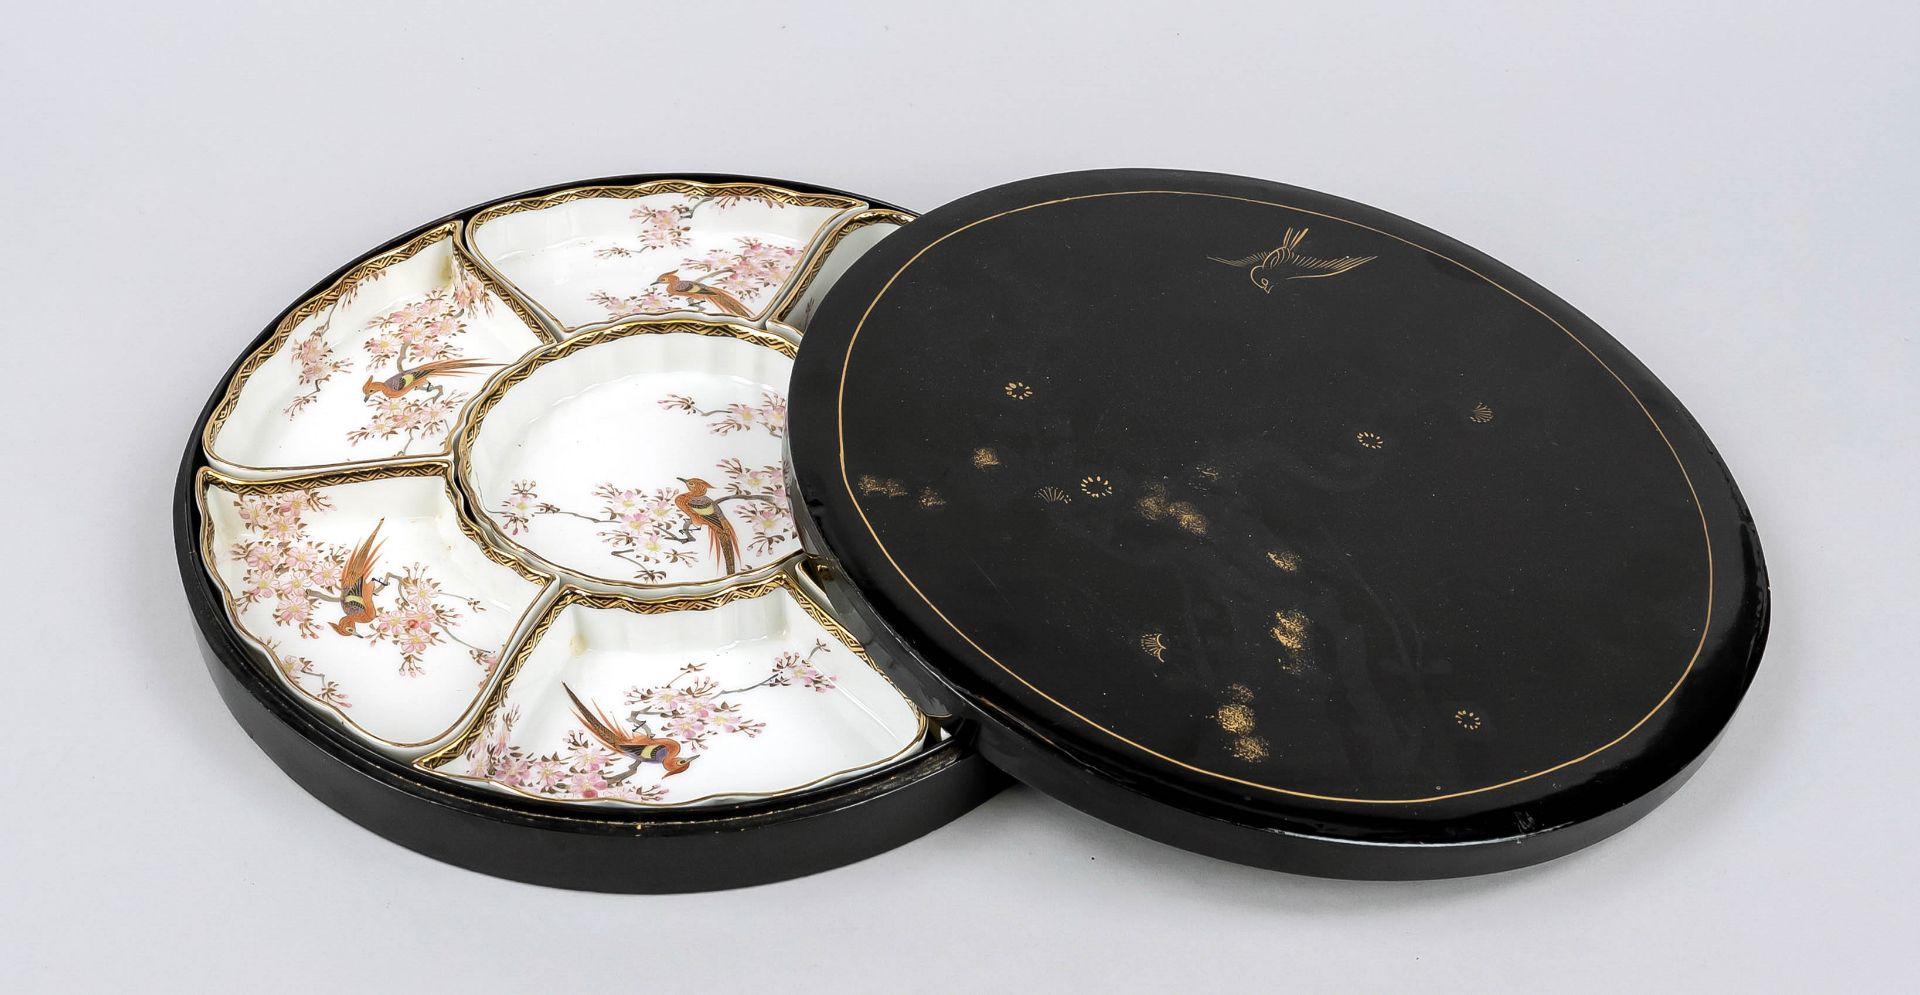 7-piece cabaret, Japan, 20th c., complete set of bowls made of kutani porcelain with decoration of a